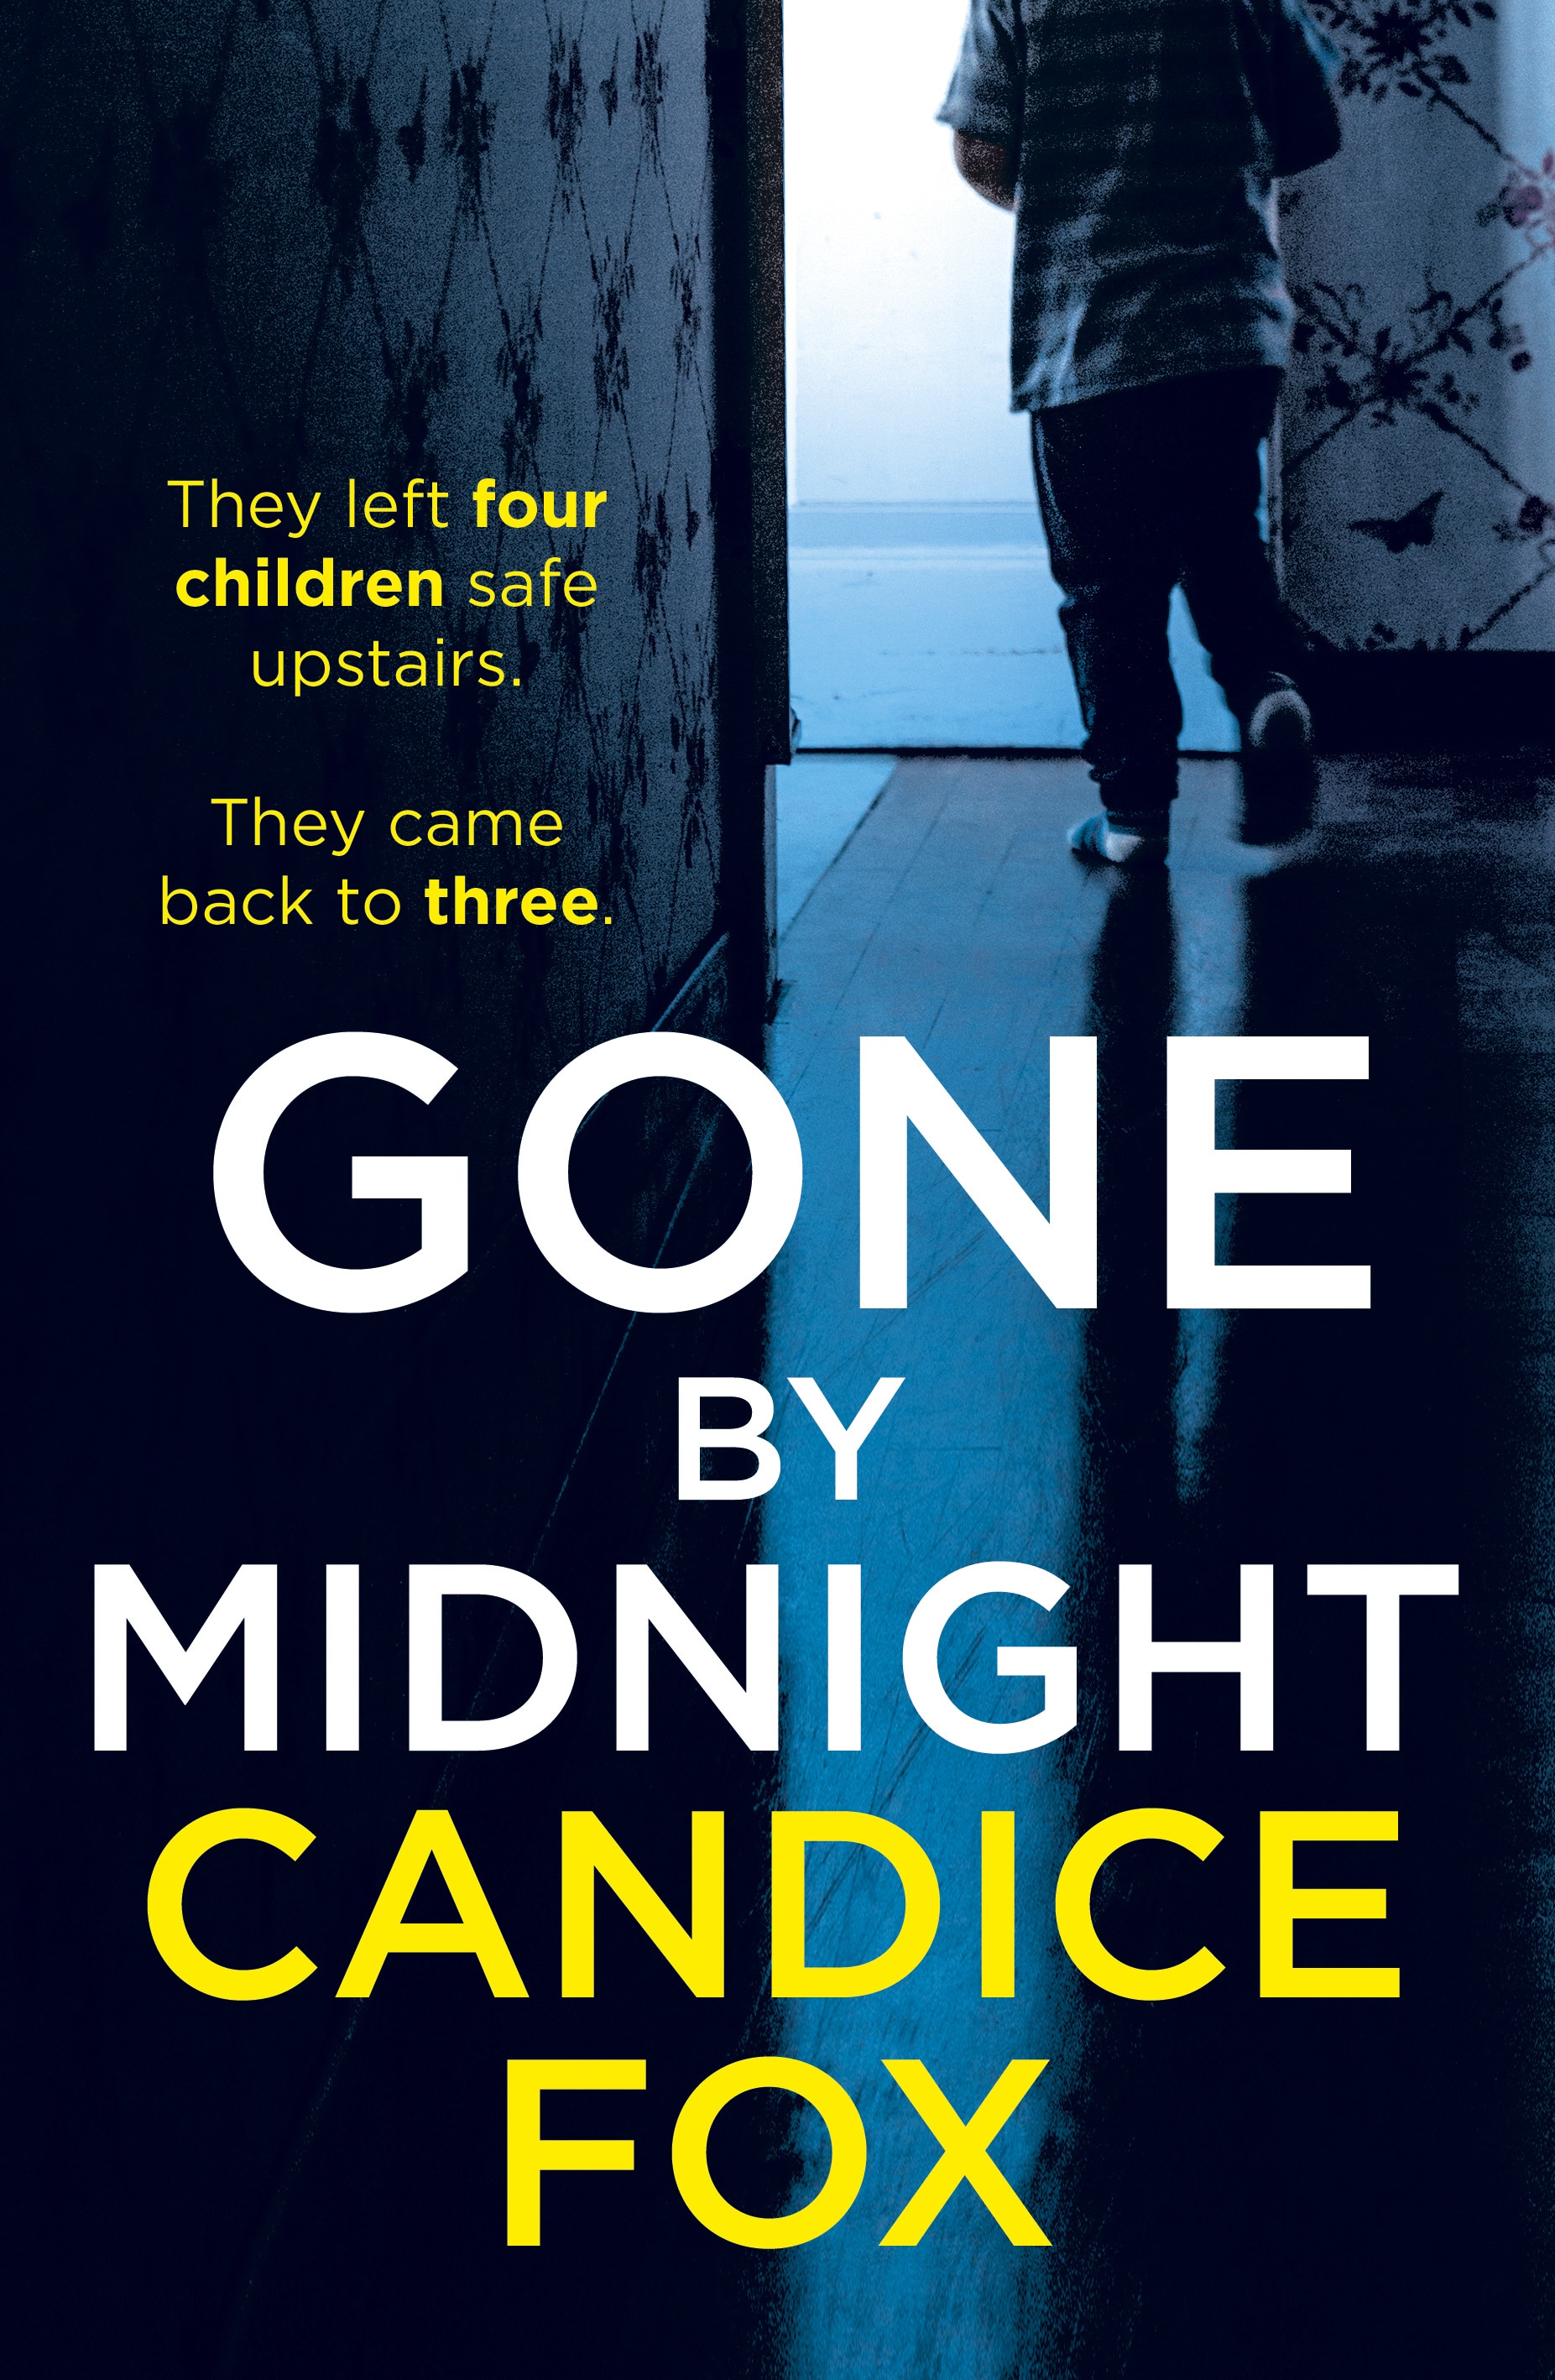 Book “Gone by Midnight” by Candice Fox — September 5, 2019